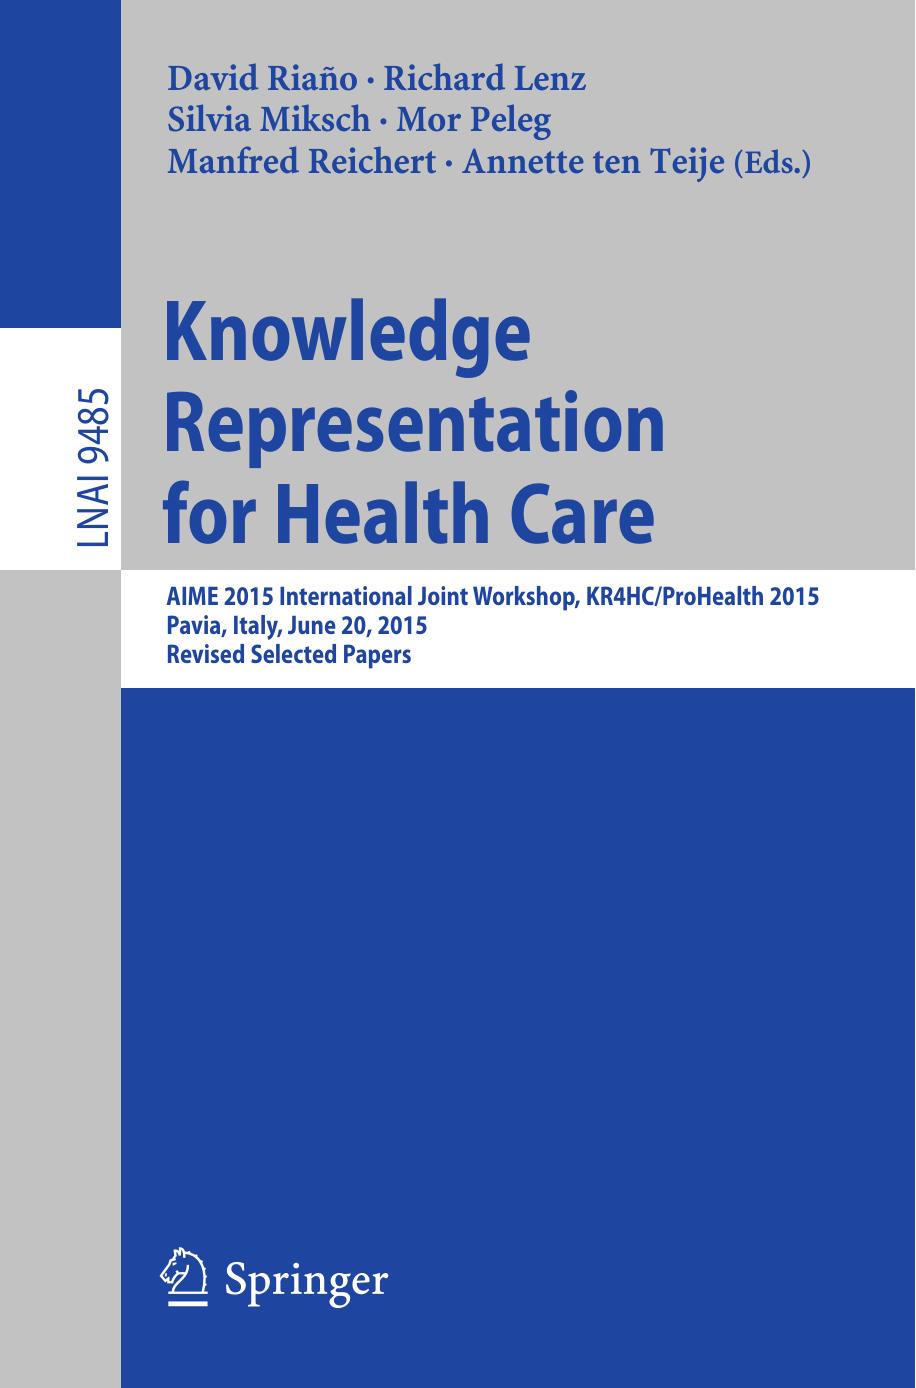 Knowledge Representation for Health Care: AIME 2015 International Joint Workshop, KR4HC/ProHealth 2015, Pavia, Italy, June 20, 2015, Revised Selected Papers